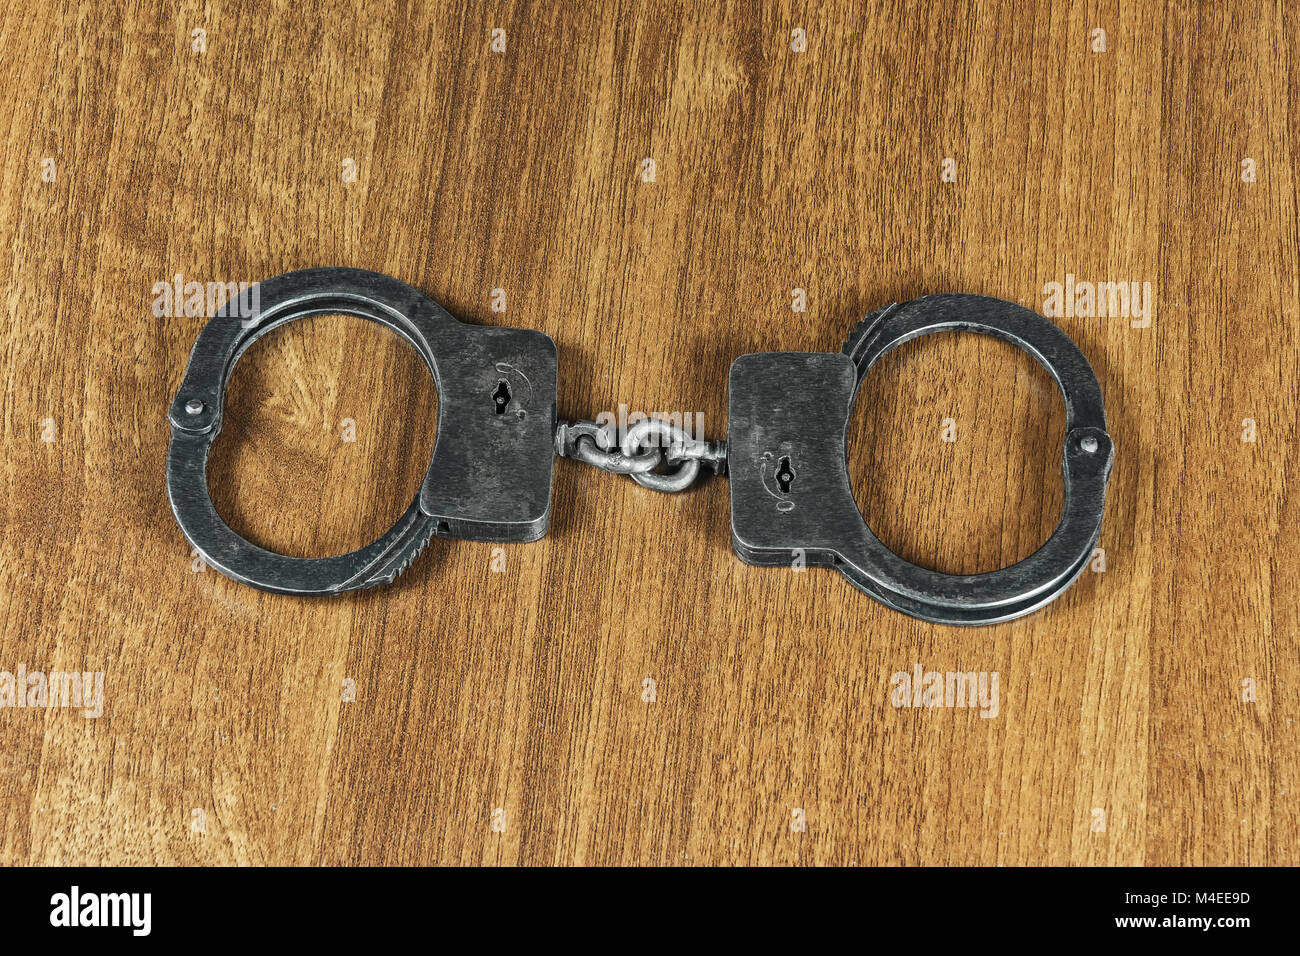 Police handcuffs lie on a wooden table Stock Photo